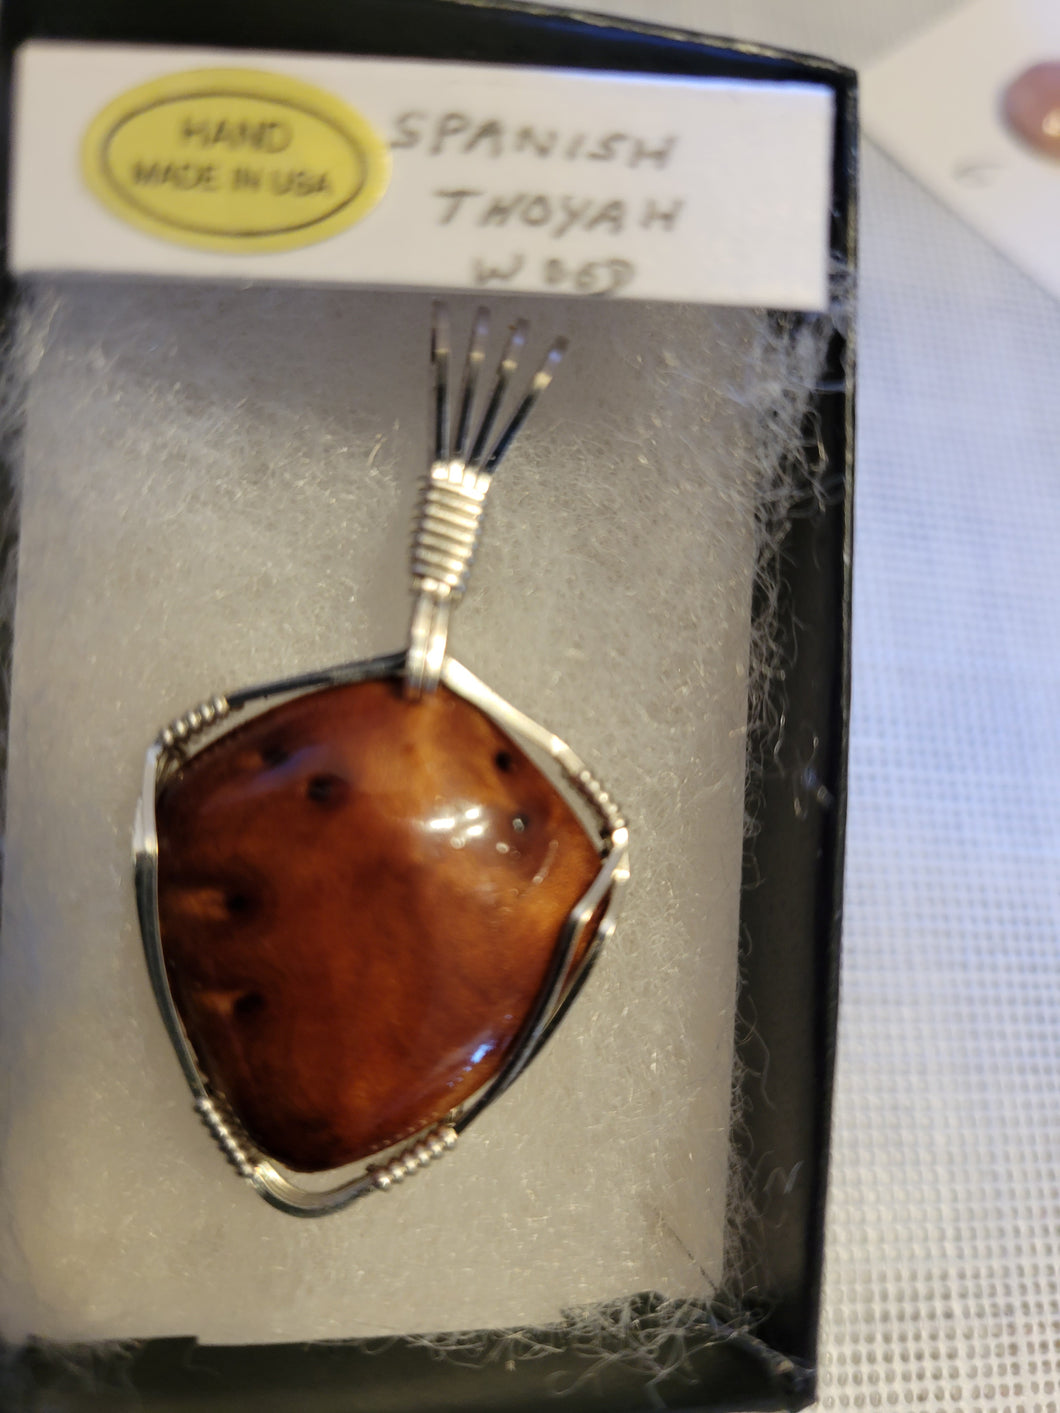 Custom Wire Wrapped Spanish Thoyah Wood Necklace/Pendant Sterling Silver